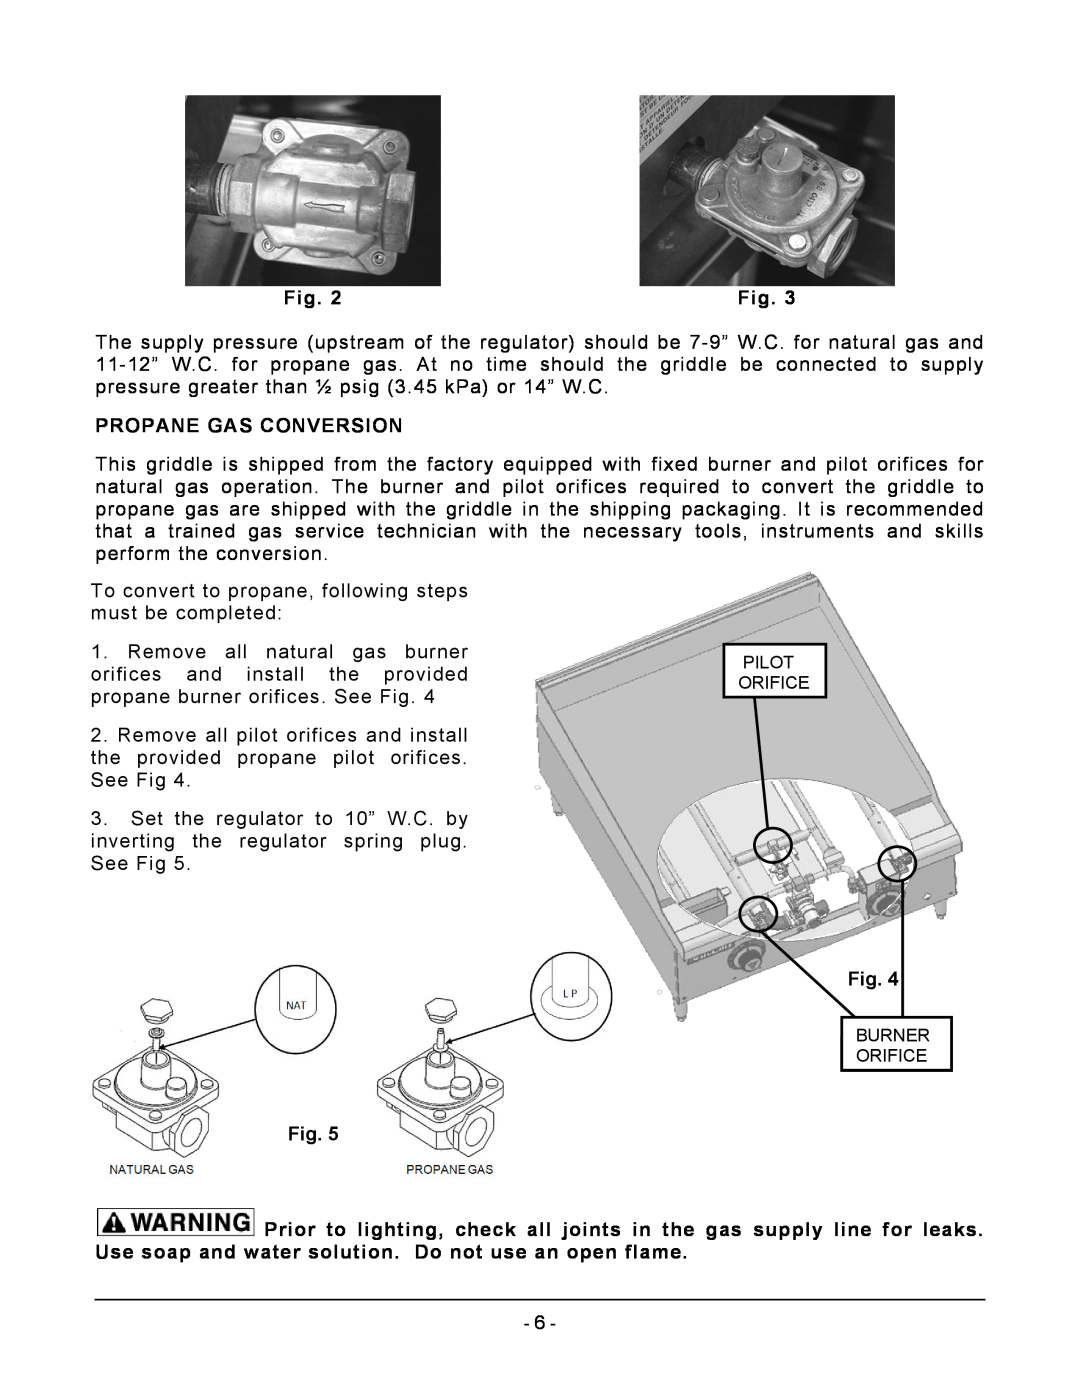 Vulcan-Hart VCRG24-T operation manual Propane Gas Conversion, To convert to propane, following steps must be completed 